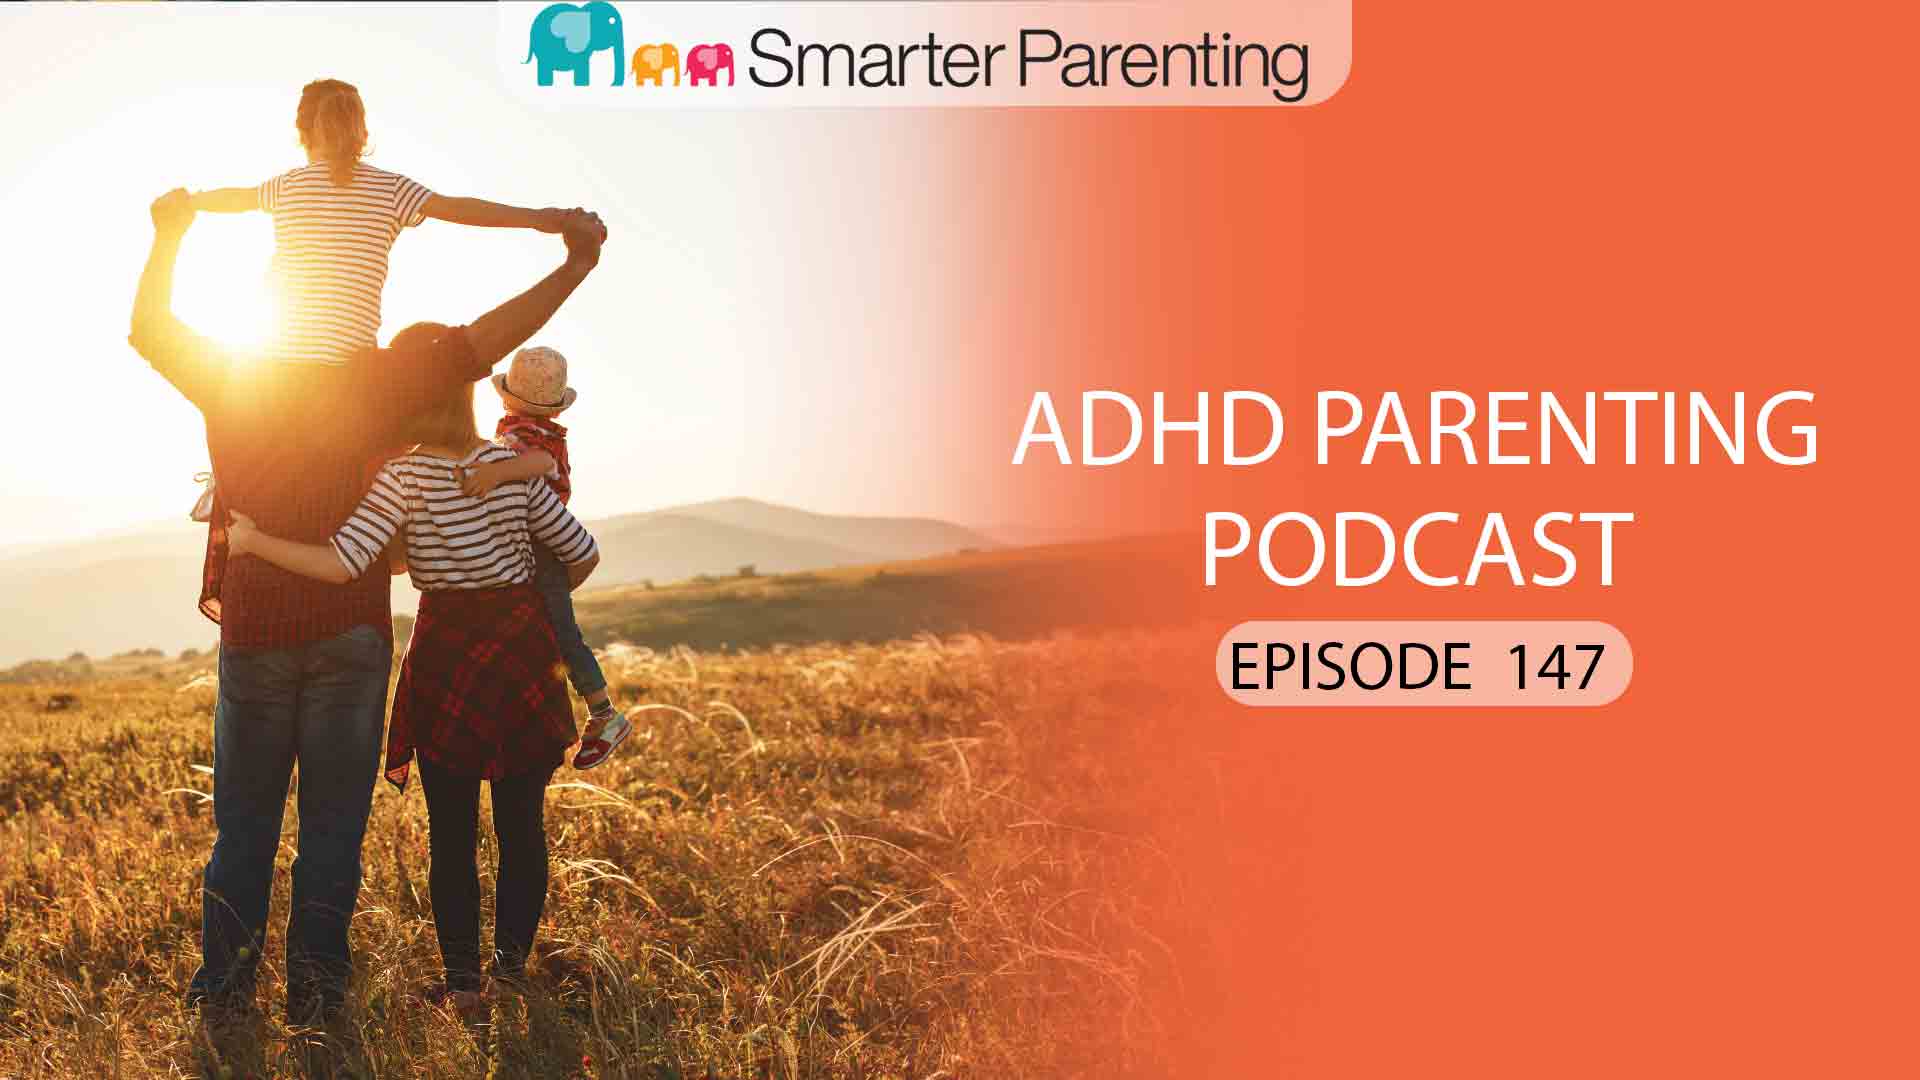 ep-147-what-to-do-when-parents-disagree-on-parenting